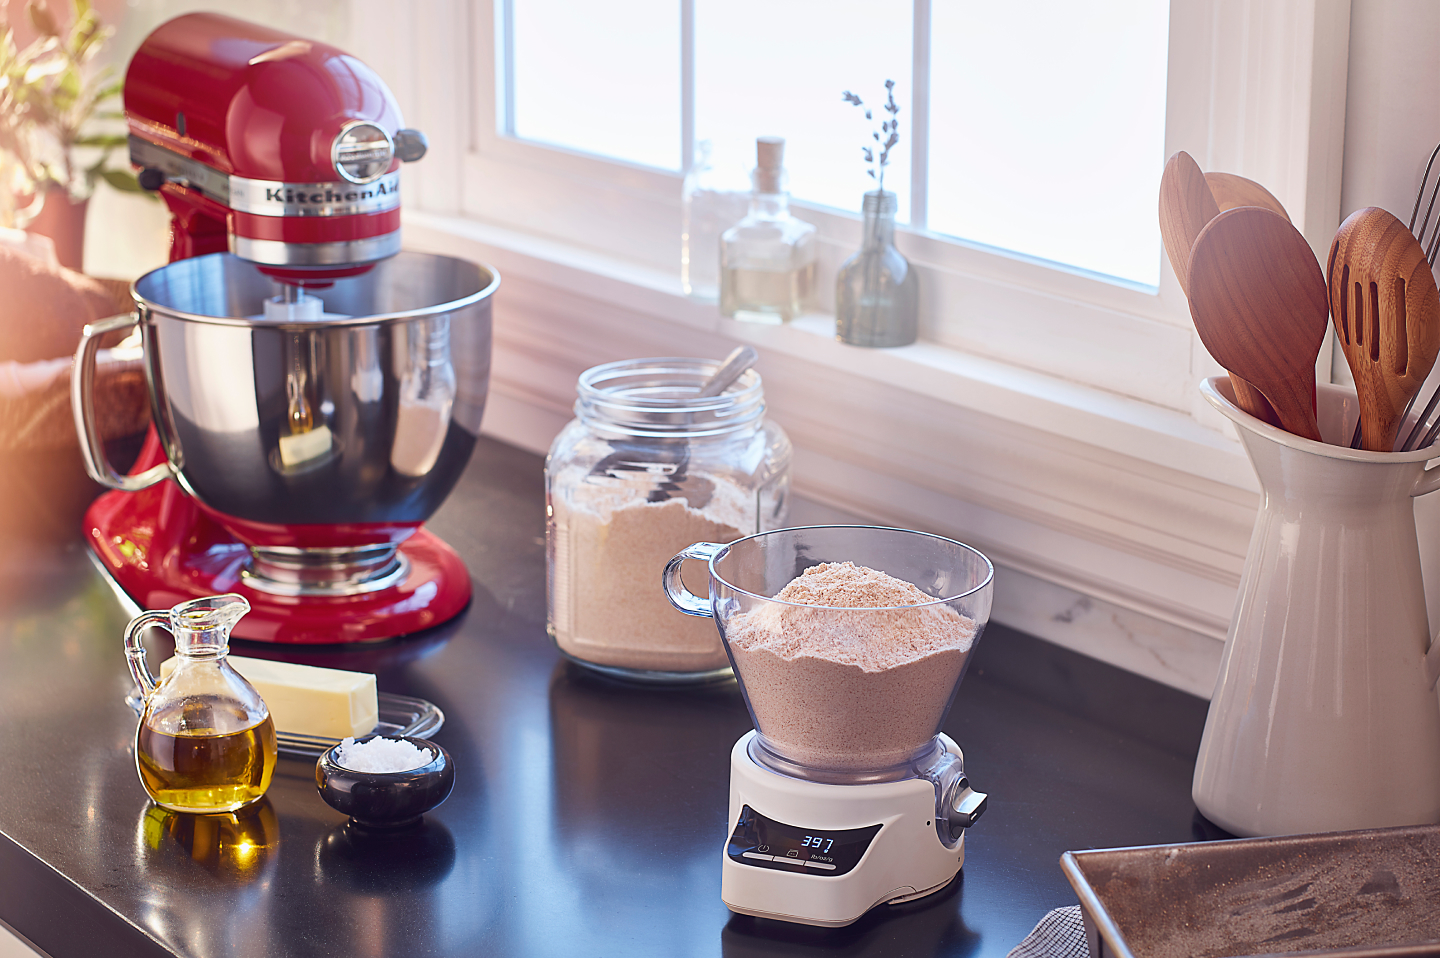 A red KitchenAid® stand mixer amongst a food scale and various baking ingredients